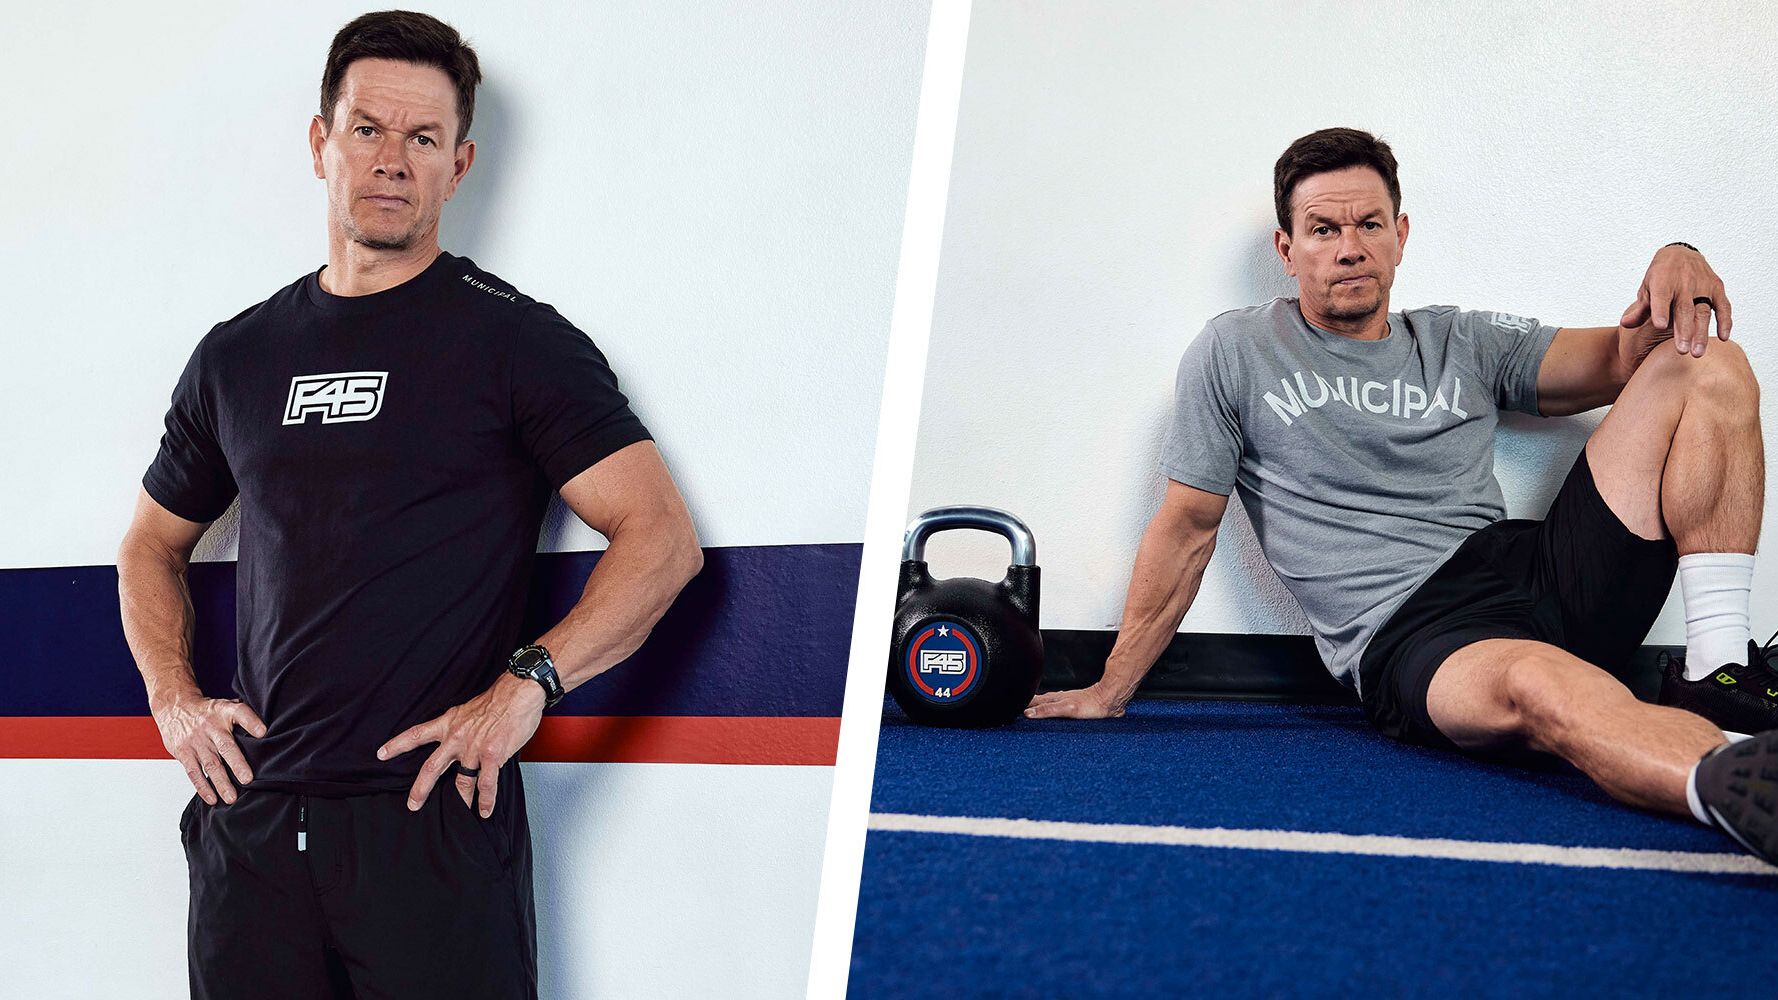 Mark Wahlberg Shares His 4 AM Schedule Ahead of F45 Workouts